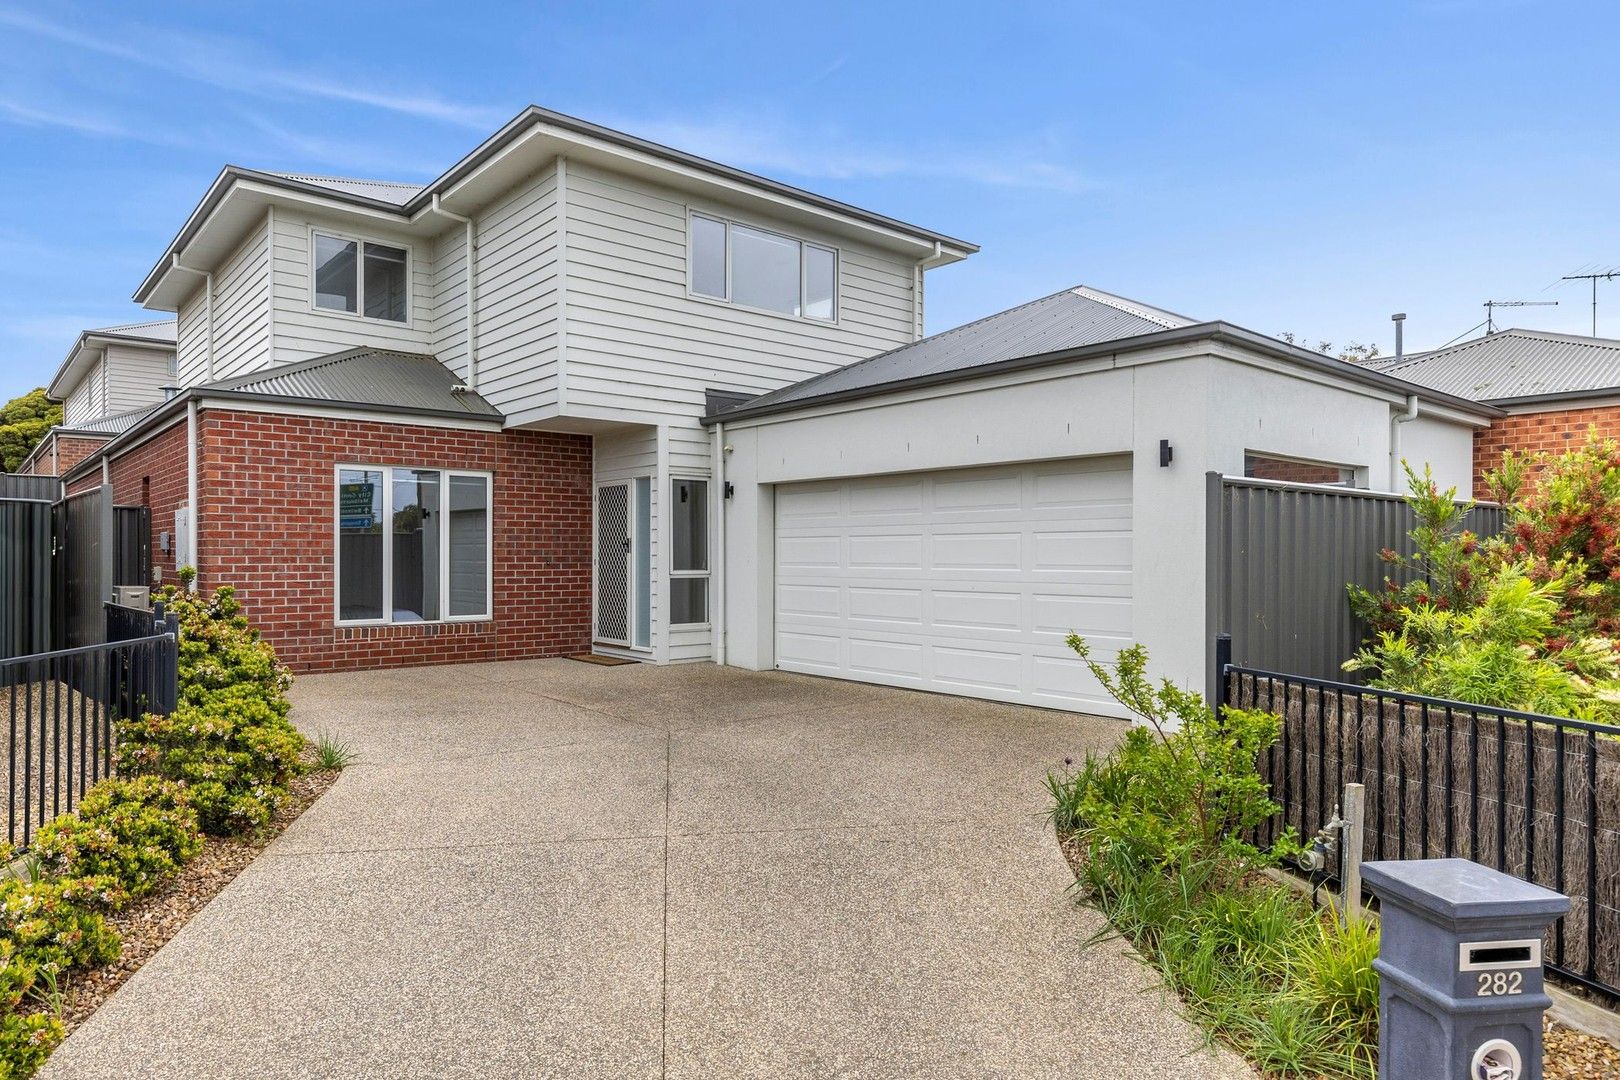 3 bedrooms Townhouse in 282 High Street BELMONT VIC, 3216